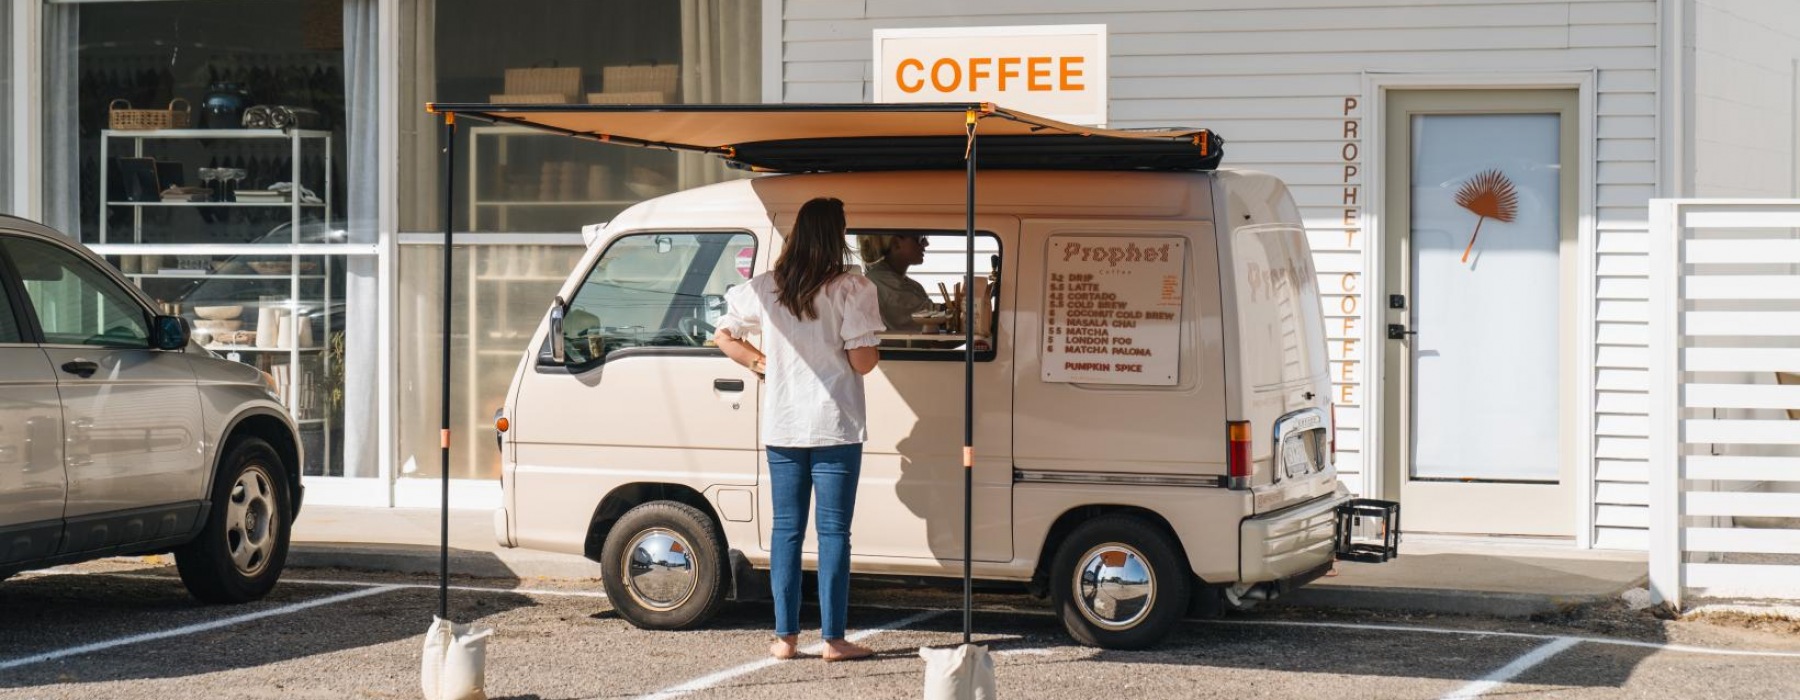 a person standing next to a coffee van